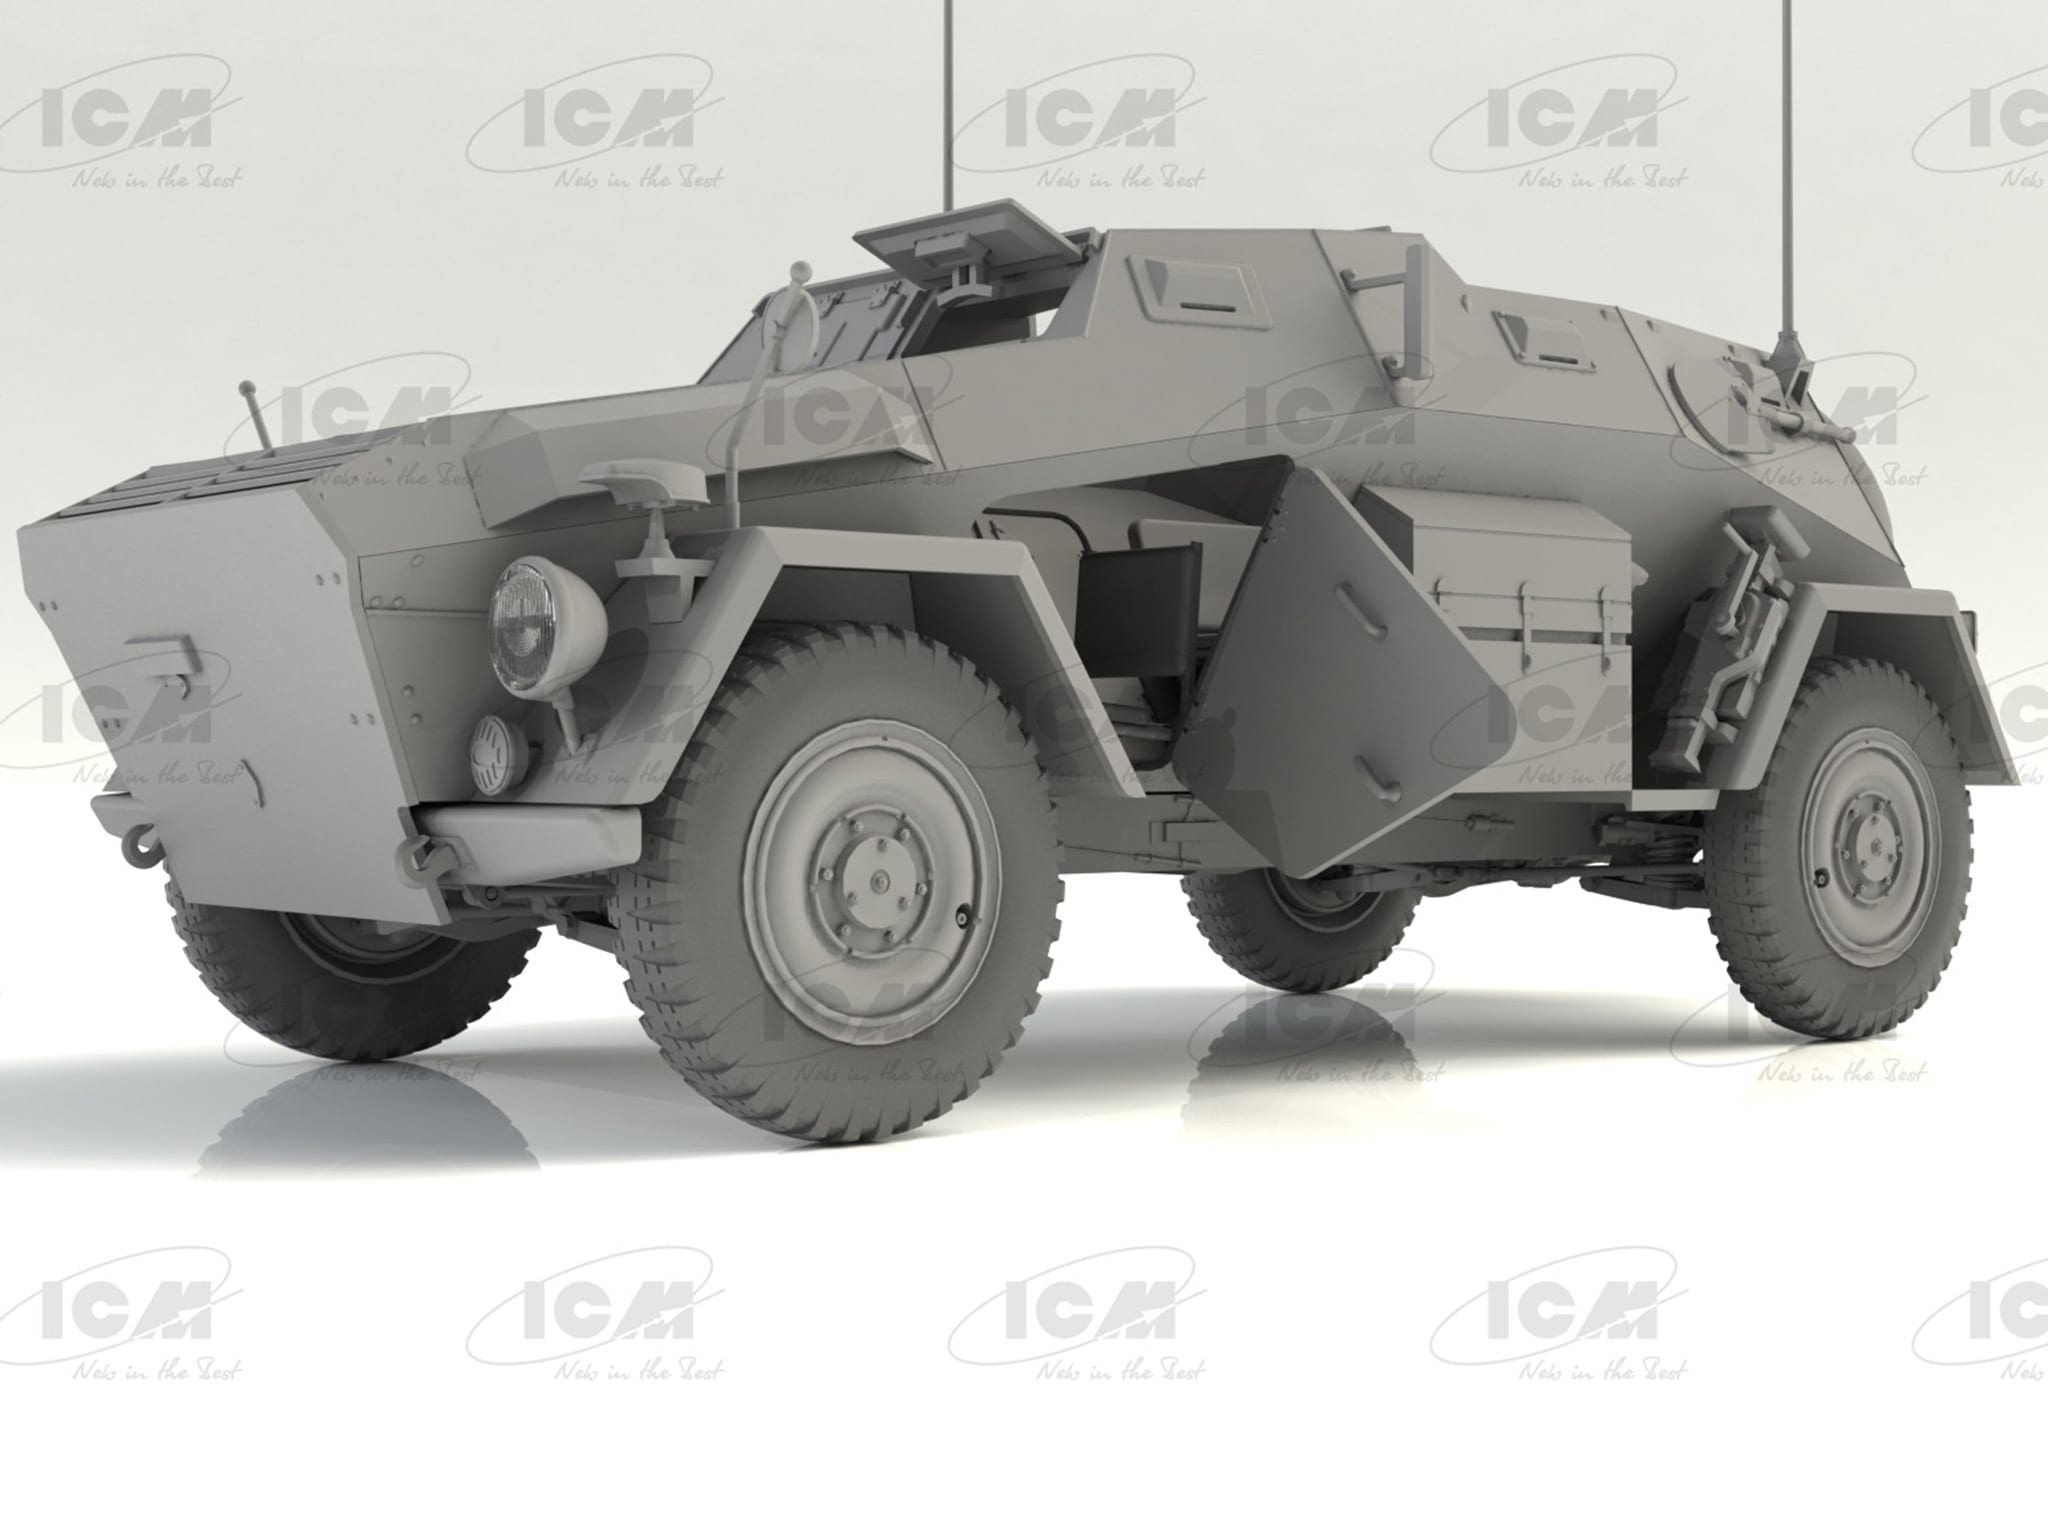 ICM 35111 Sd.kfz 247 Ausf.b With Crew Scale Plastic Model Kit 1/35 for sale online 